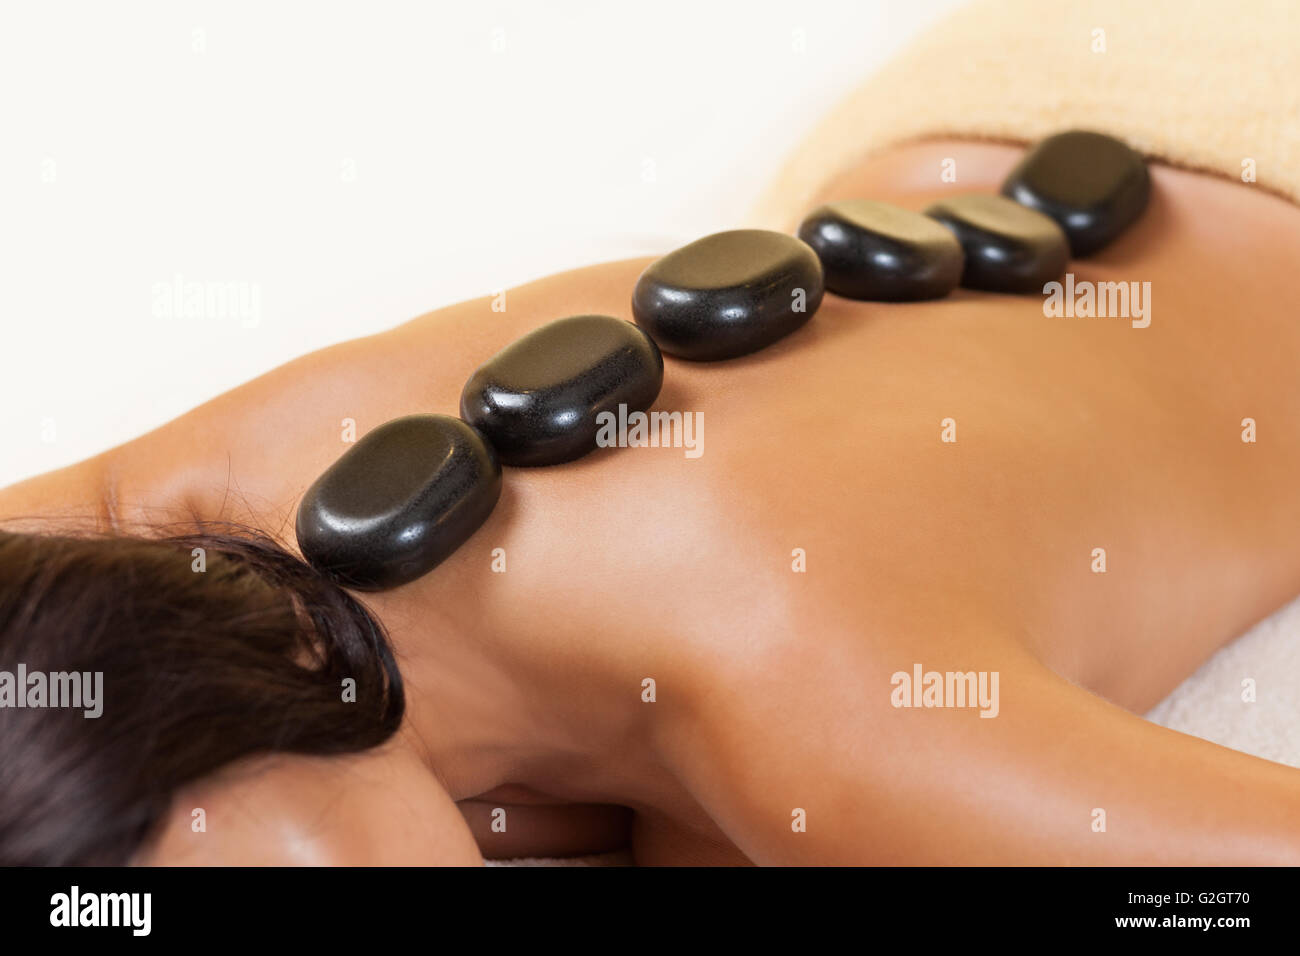 Spa therapy procedure with stones Stock Photo